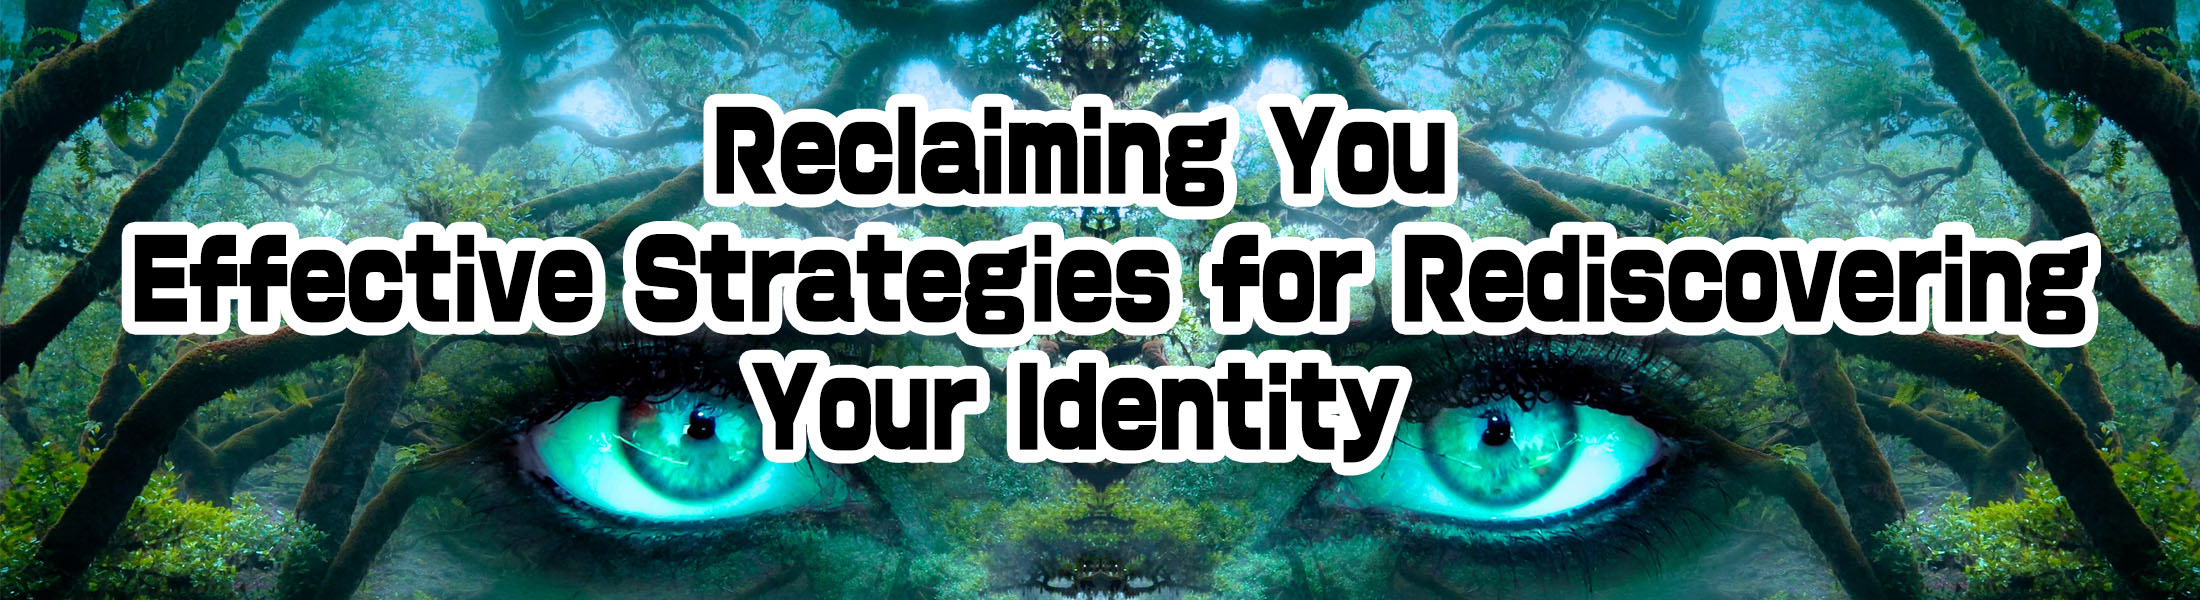 Reclaiming Your Autonomy: Strategies to Rekindle Your Sense of Independence